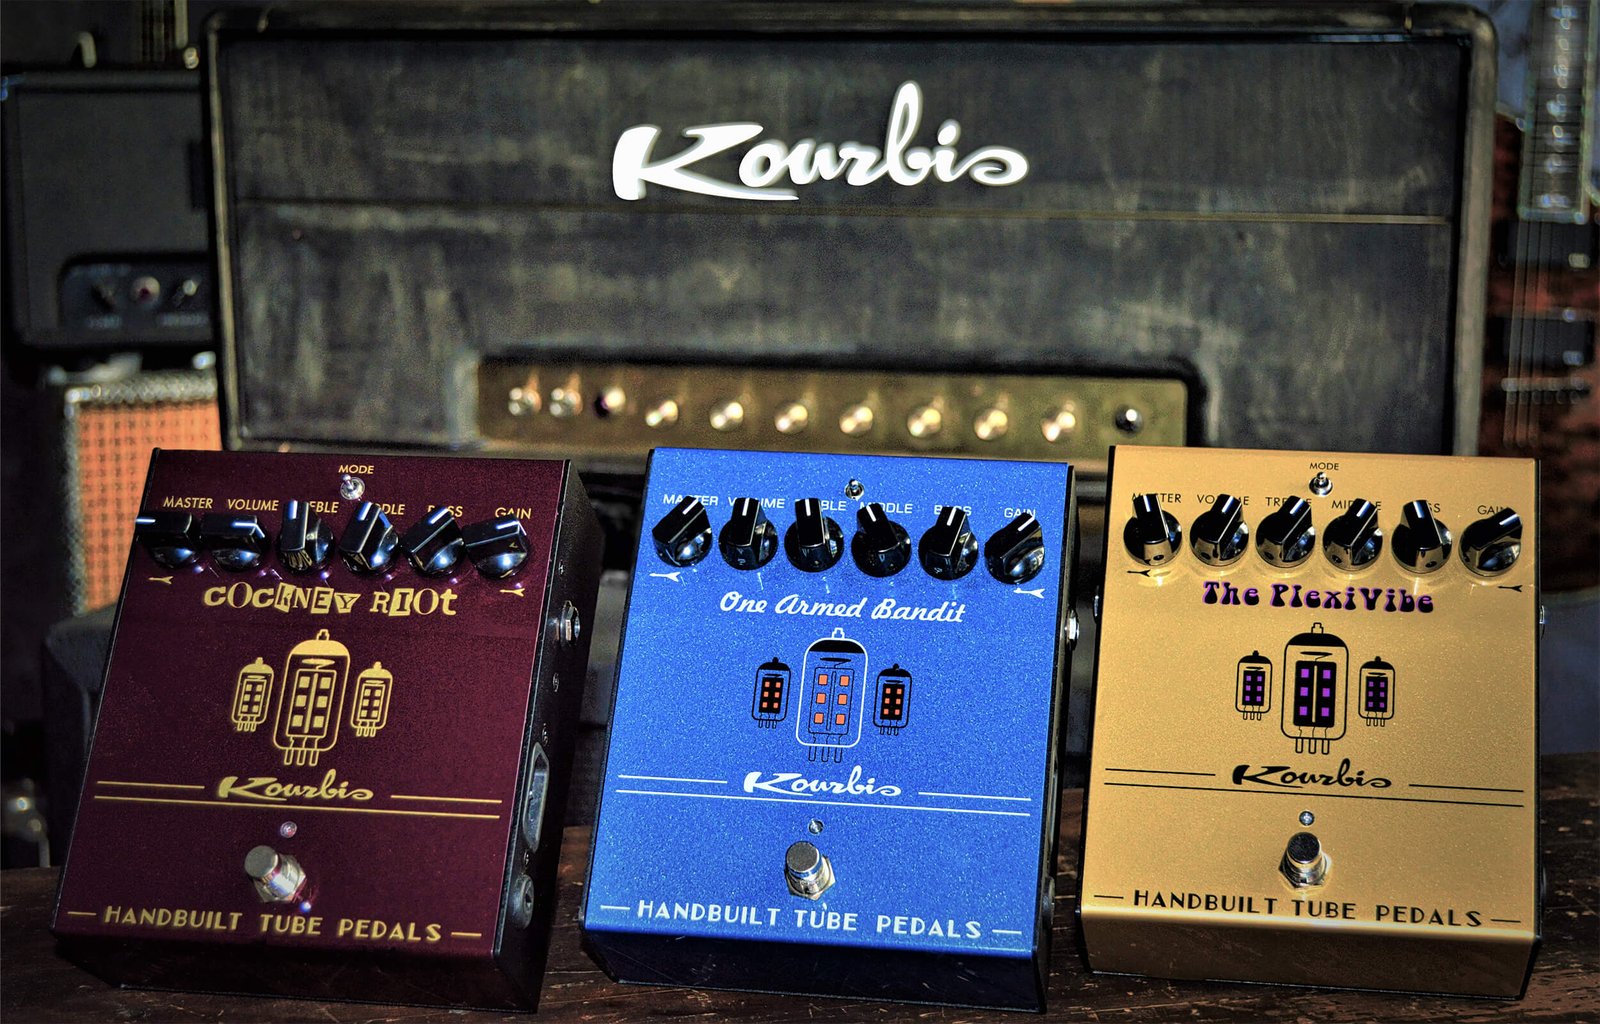 12ax7 tube preamp pedals, gold, blue, and burgandy, hand paint,in front of custom kourbis tube amp